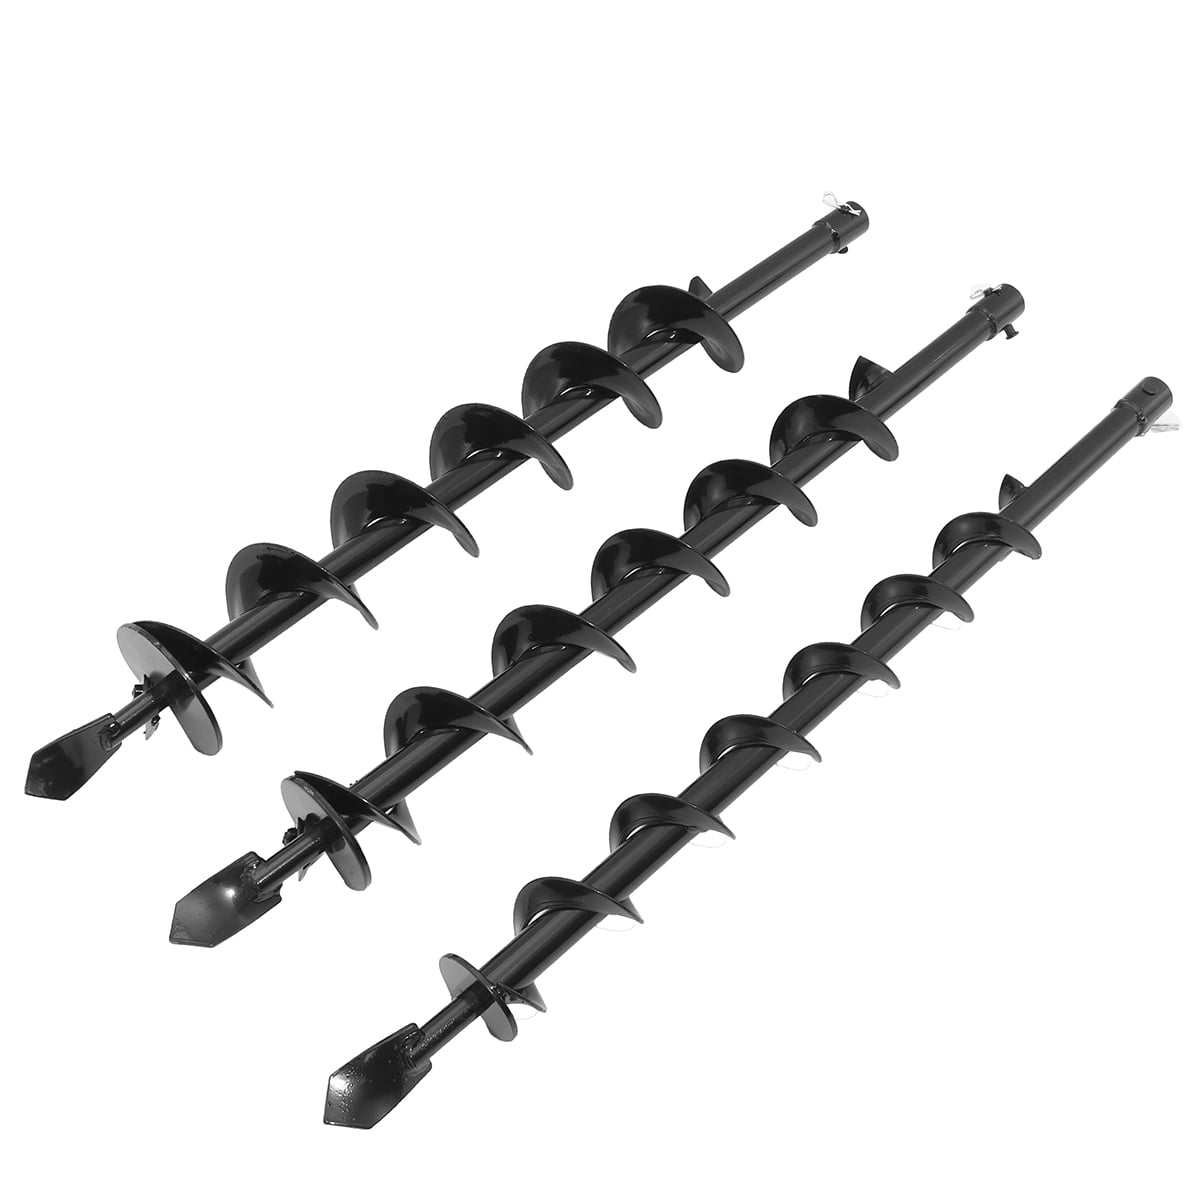 Details about   9"-18'' Planting Auger Spiral Hole Drill Bit For Garden Yard Earth Bulb Planter 